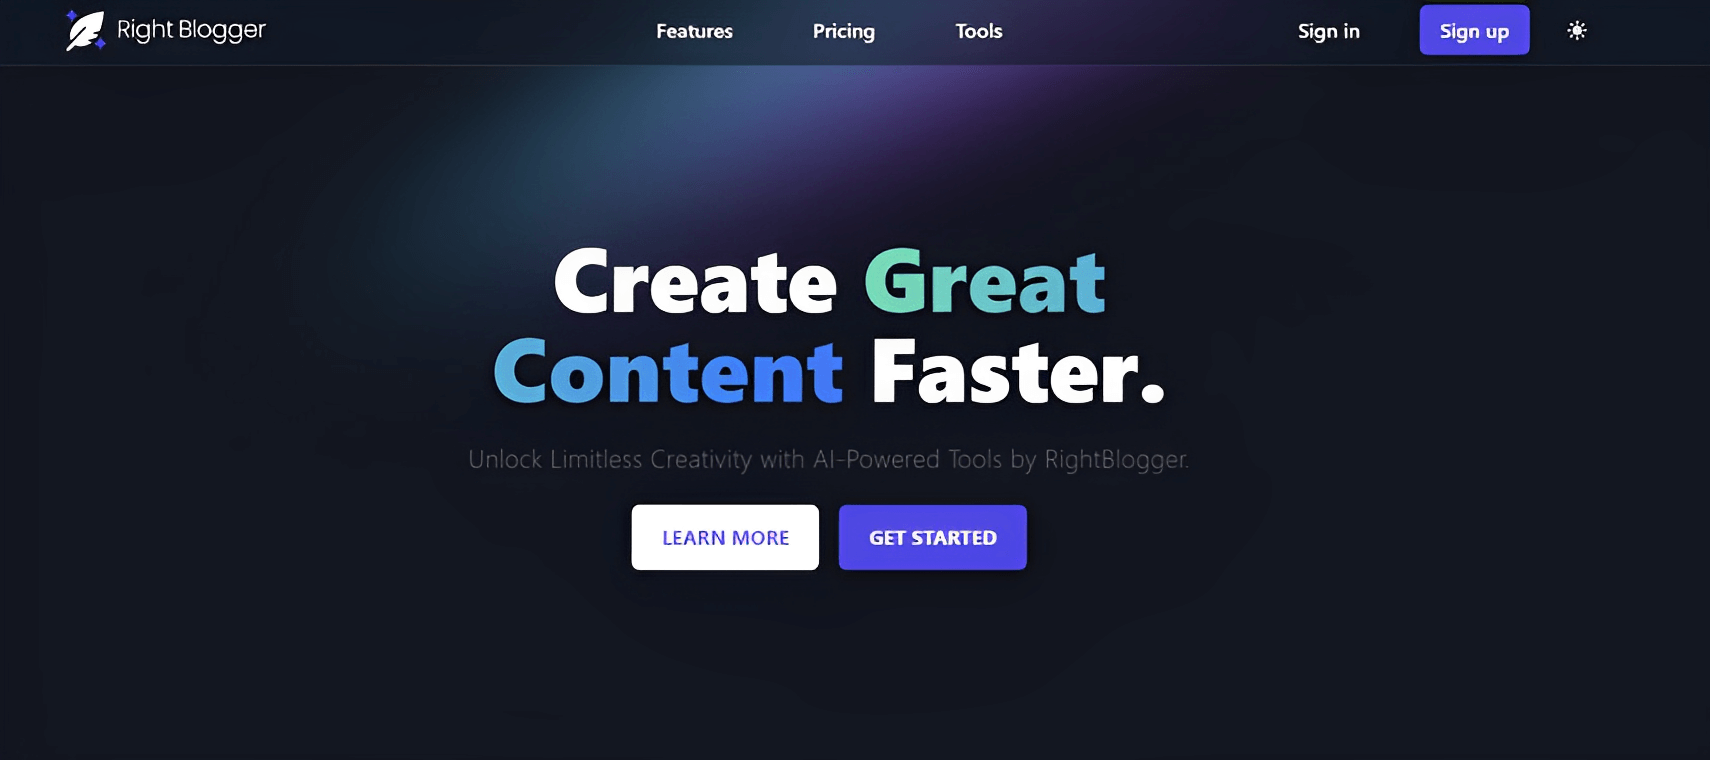 RightBlogger: Ai Tools for Bloggers